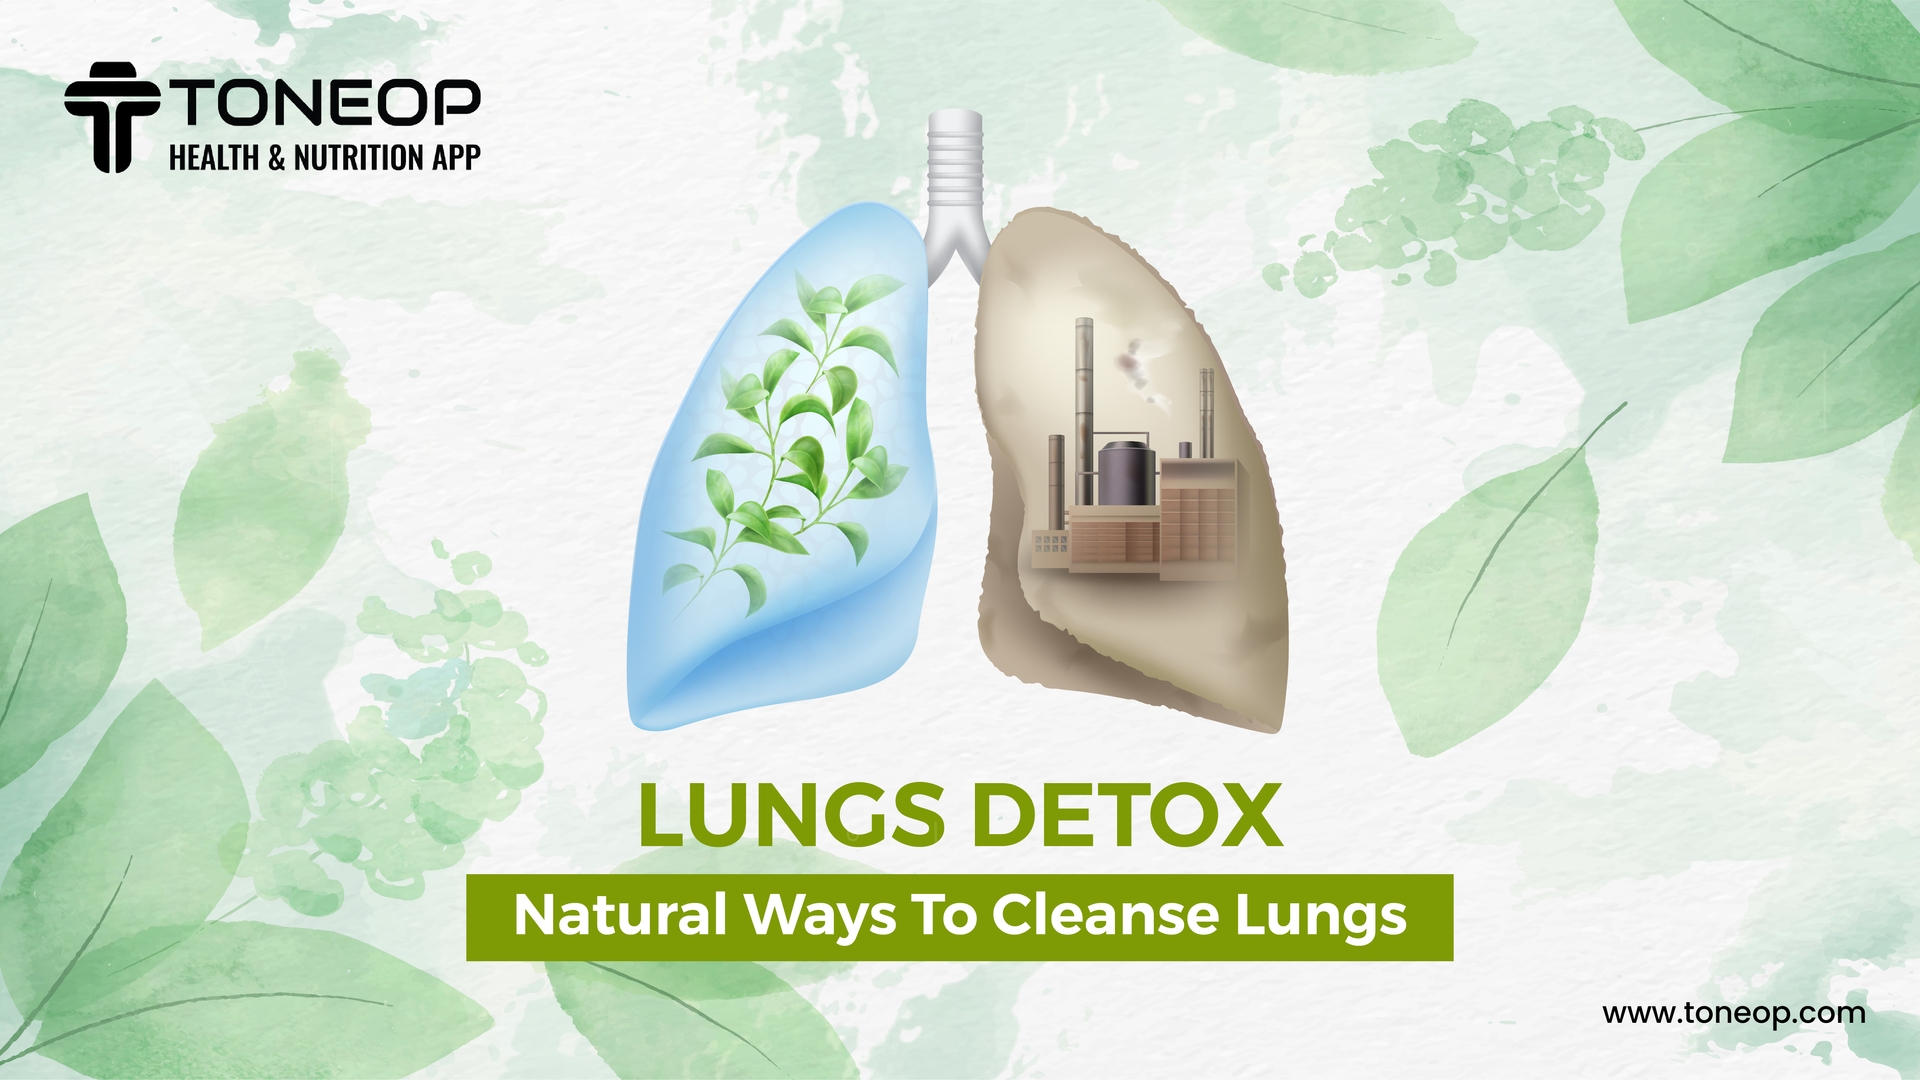 Lungs Detox: Natural Ways To Cleanse Lungs